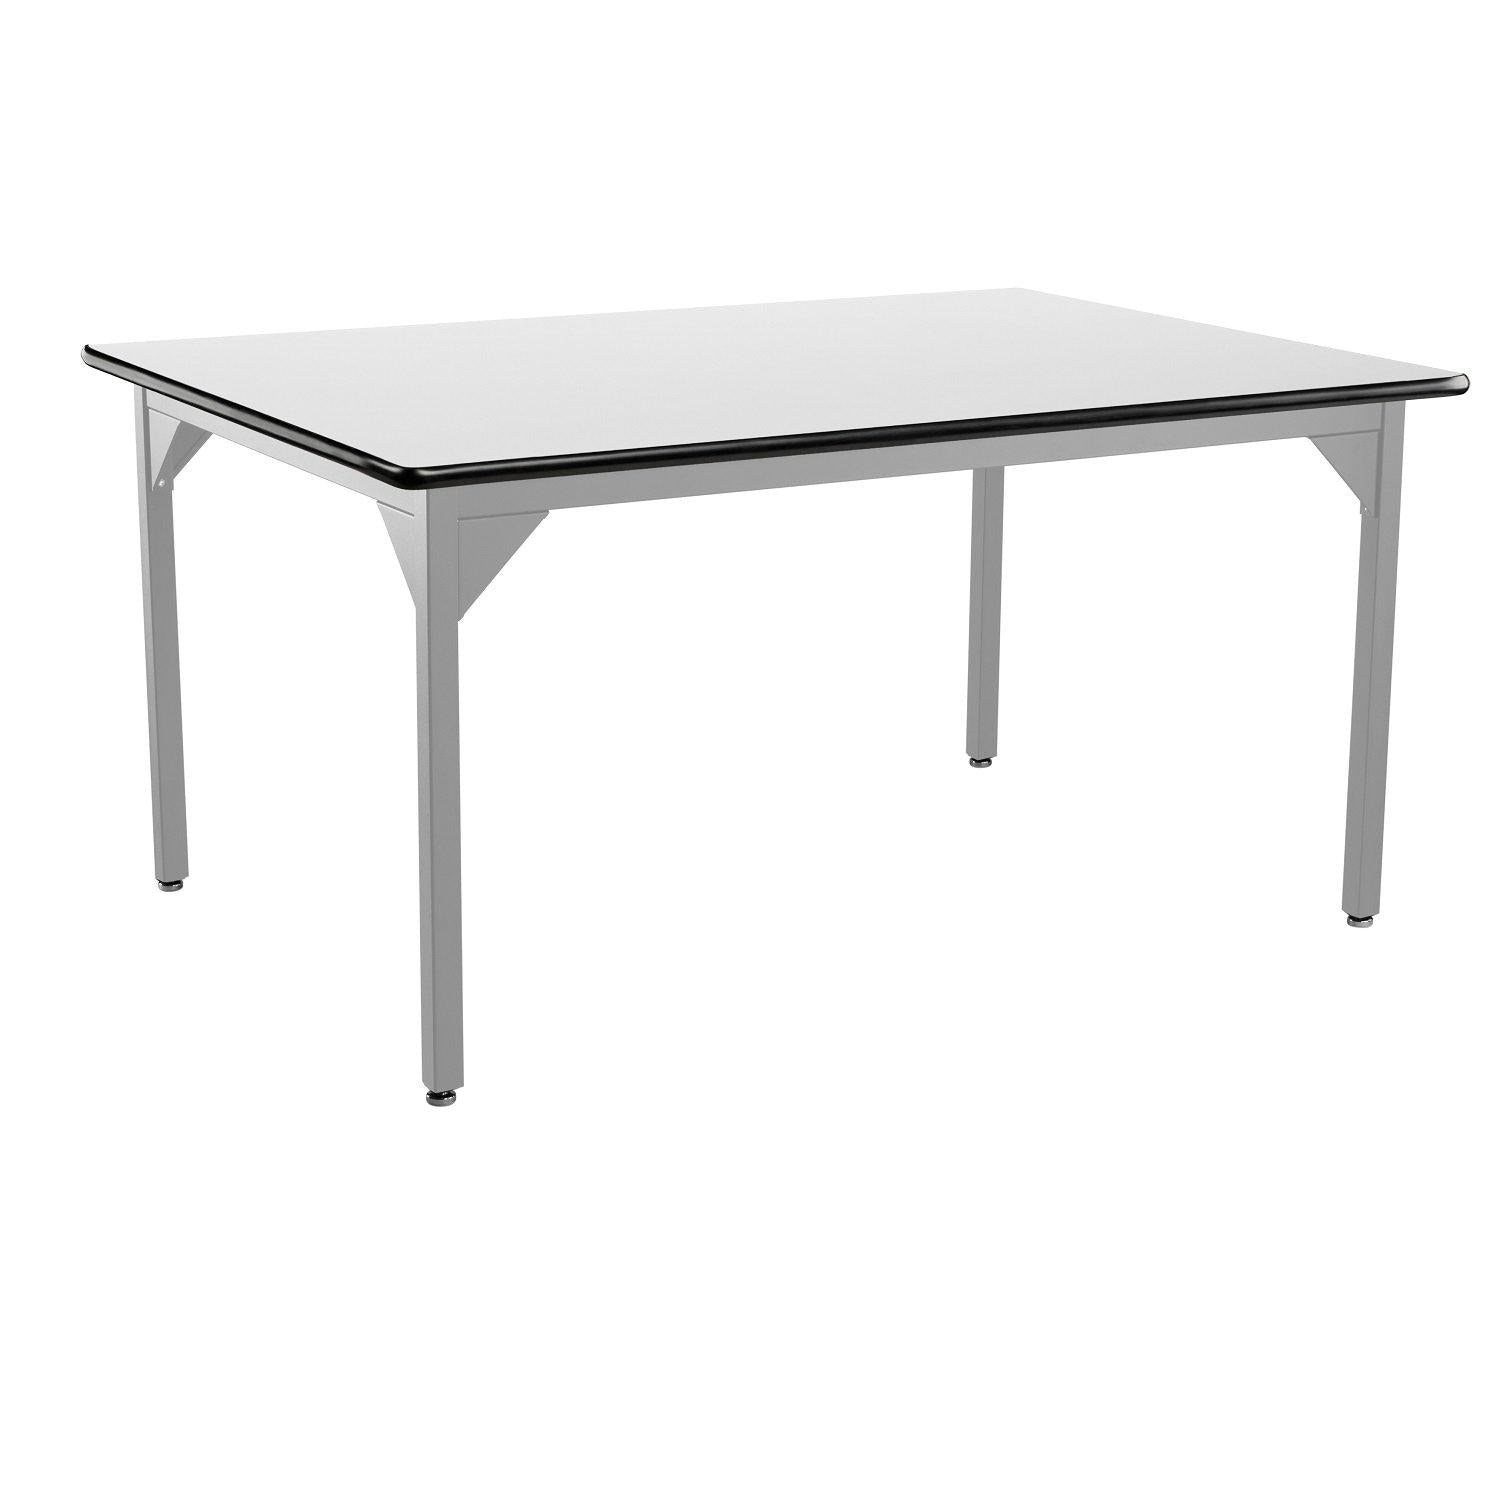 Heavy-Duty Fixed Height Utility Table, Soft Grey Frame, 48" x 48", Whiteboard High-Pressure Laminate Top